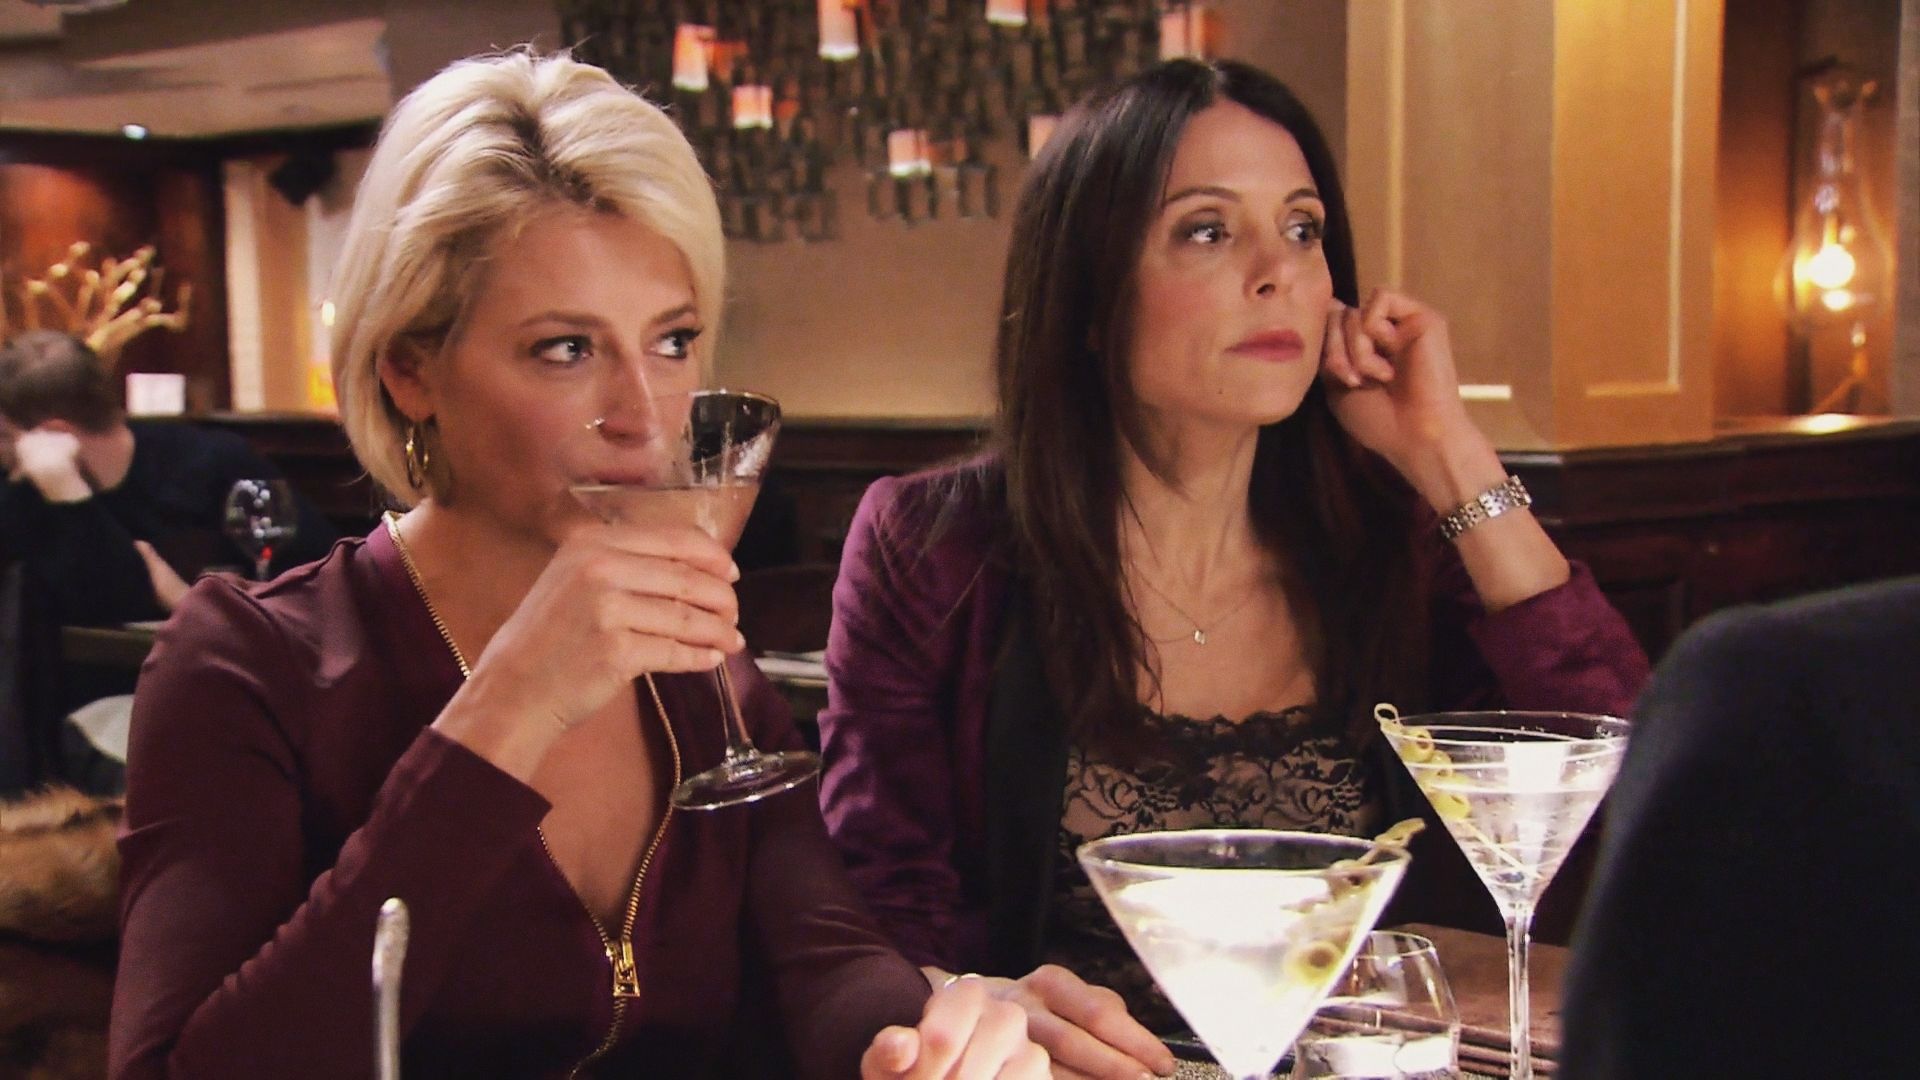 RHONY The Real Housewives of New York City S07E10 saison 7 épisode 10 Sexe & vernis à ongles